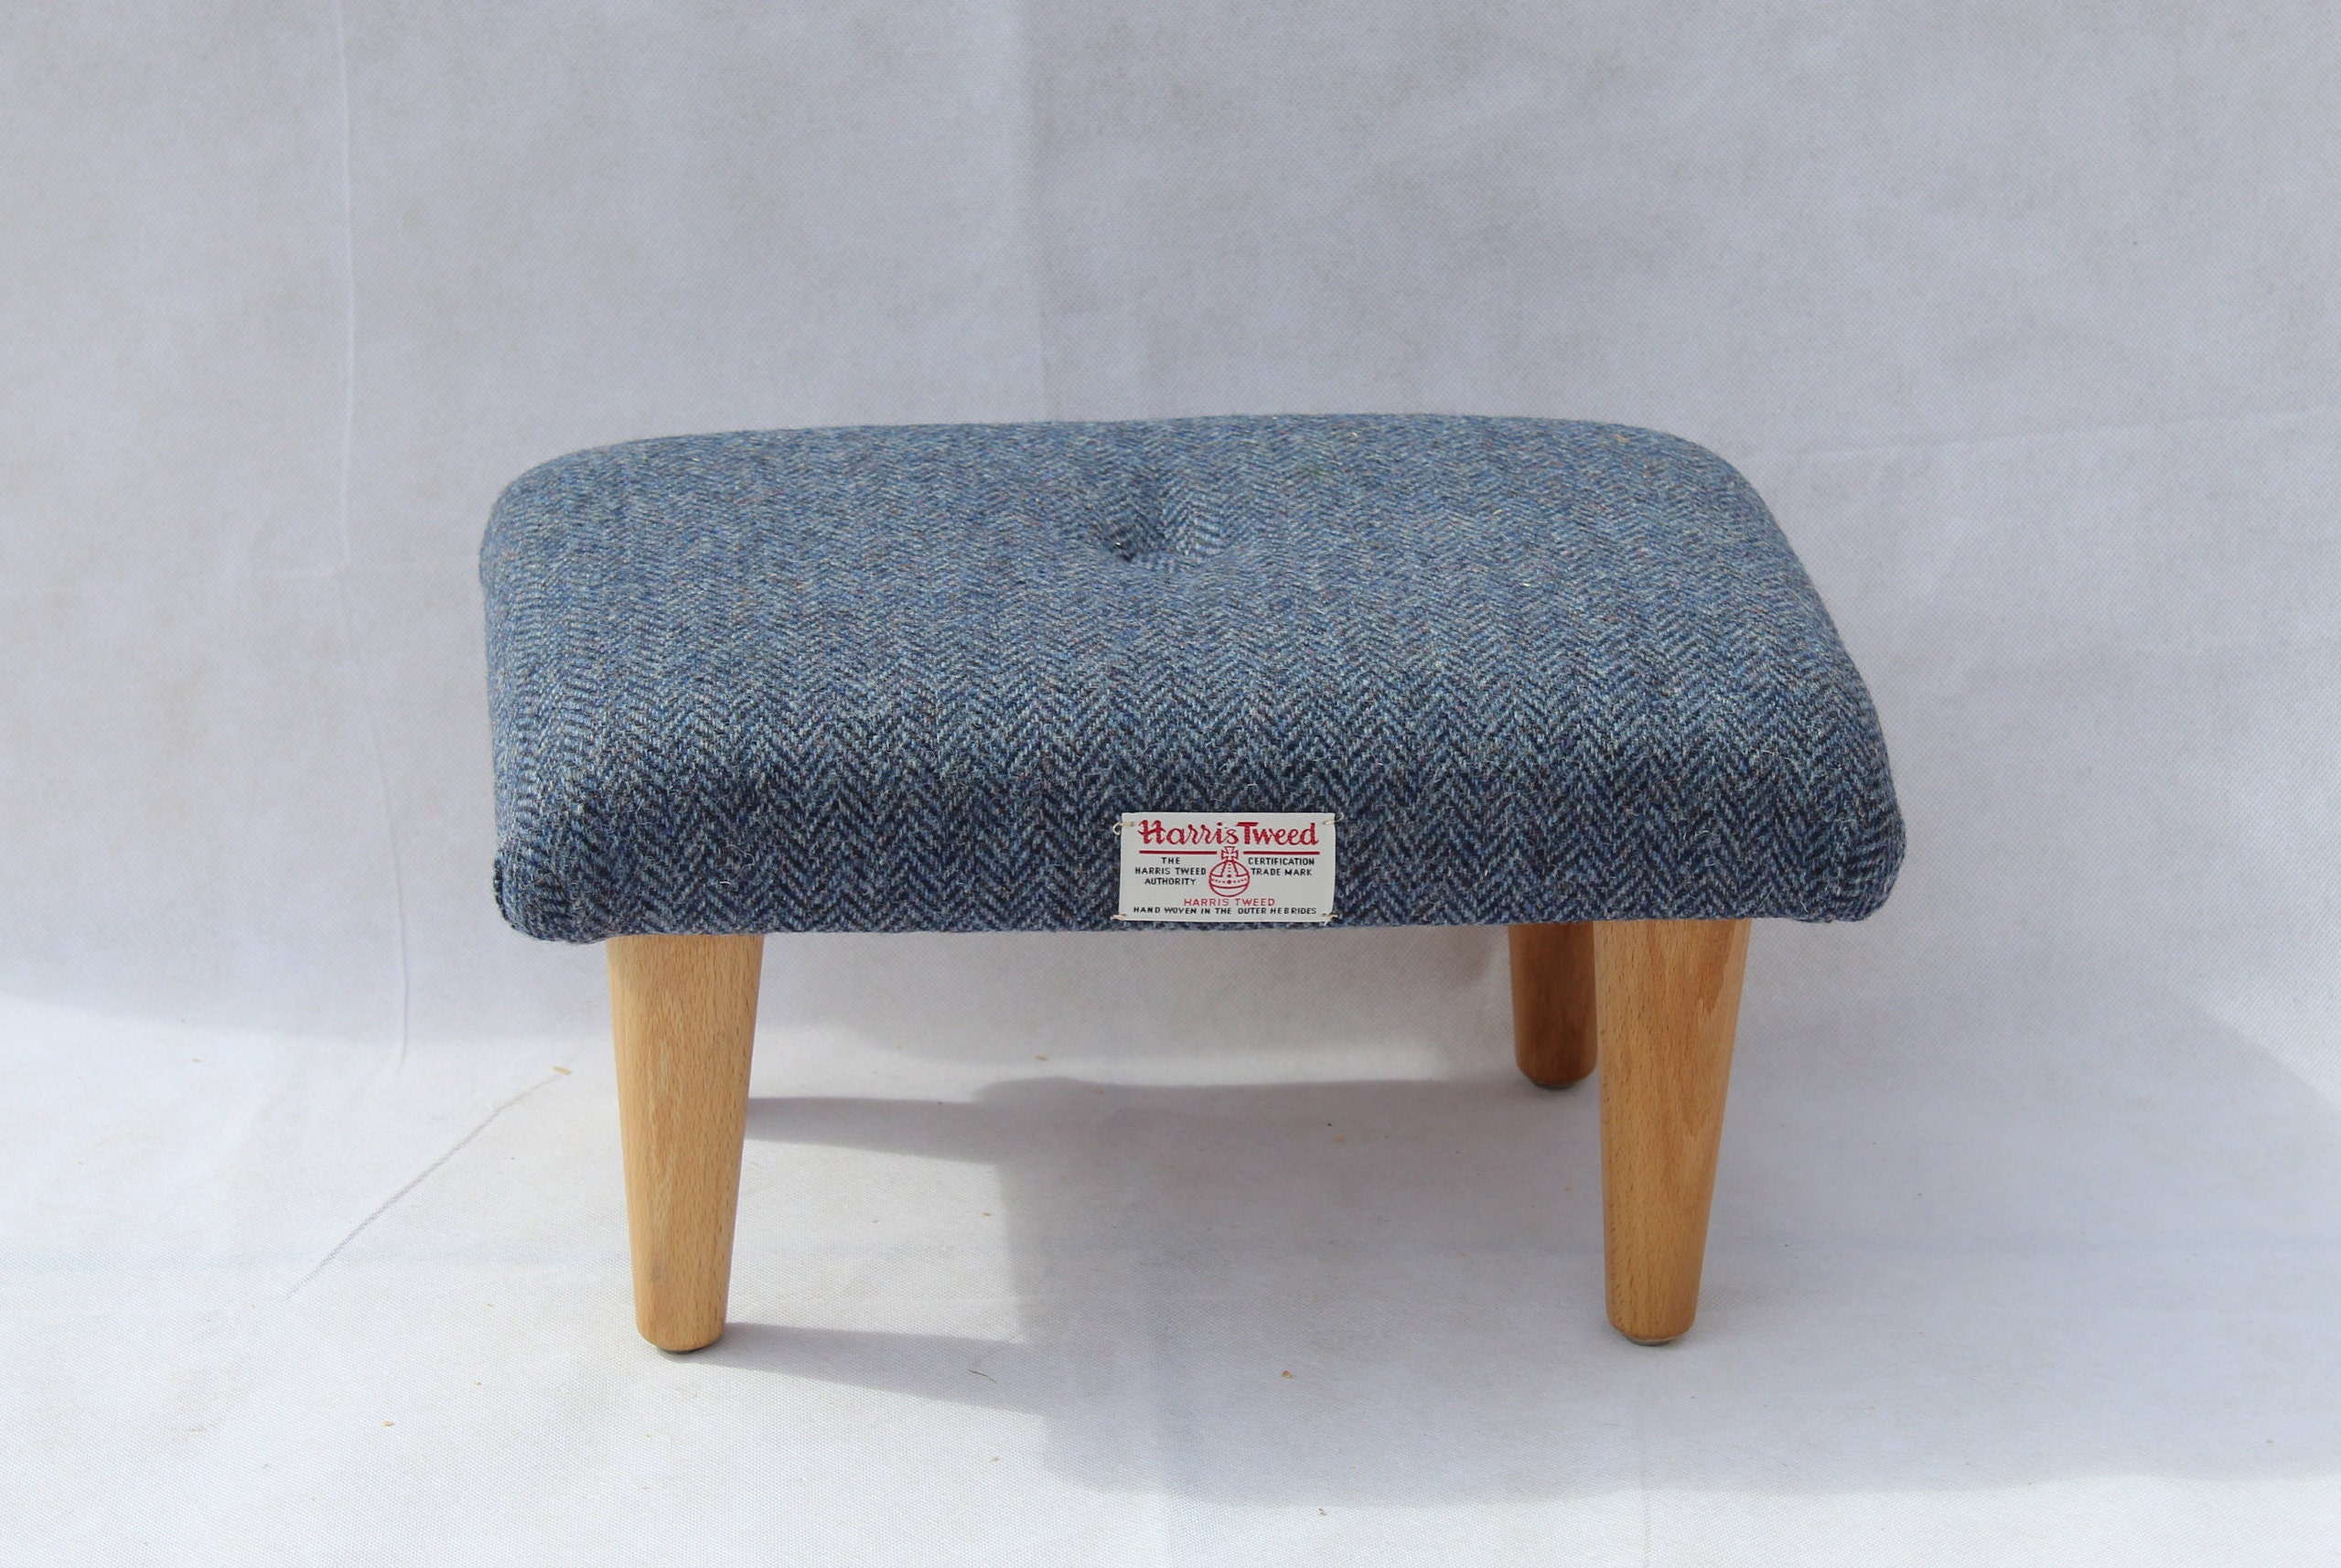 NEW Blue Midnight 19-29 Cm Tall Small Foot Stool With Button/ Upholstered Footstool  Low Stool for Father Mother Gift Idea Handmade Footstep 